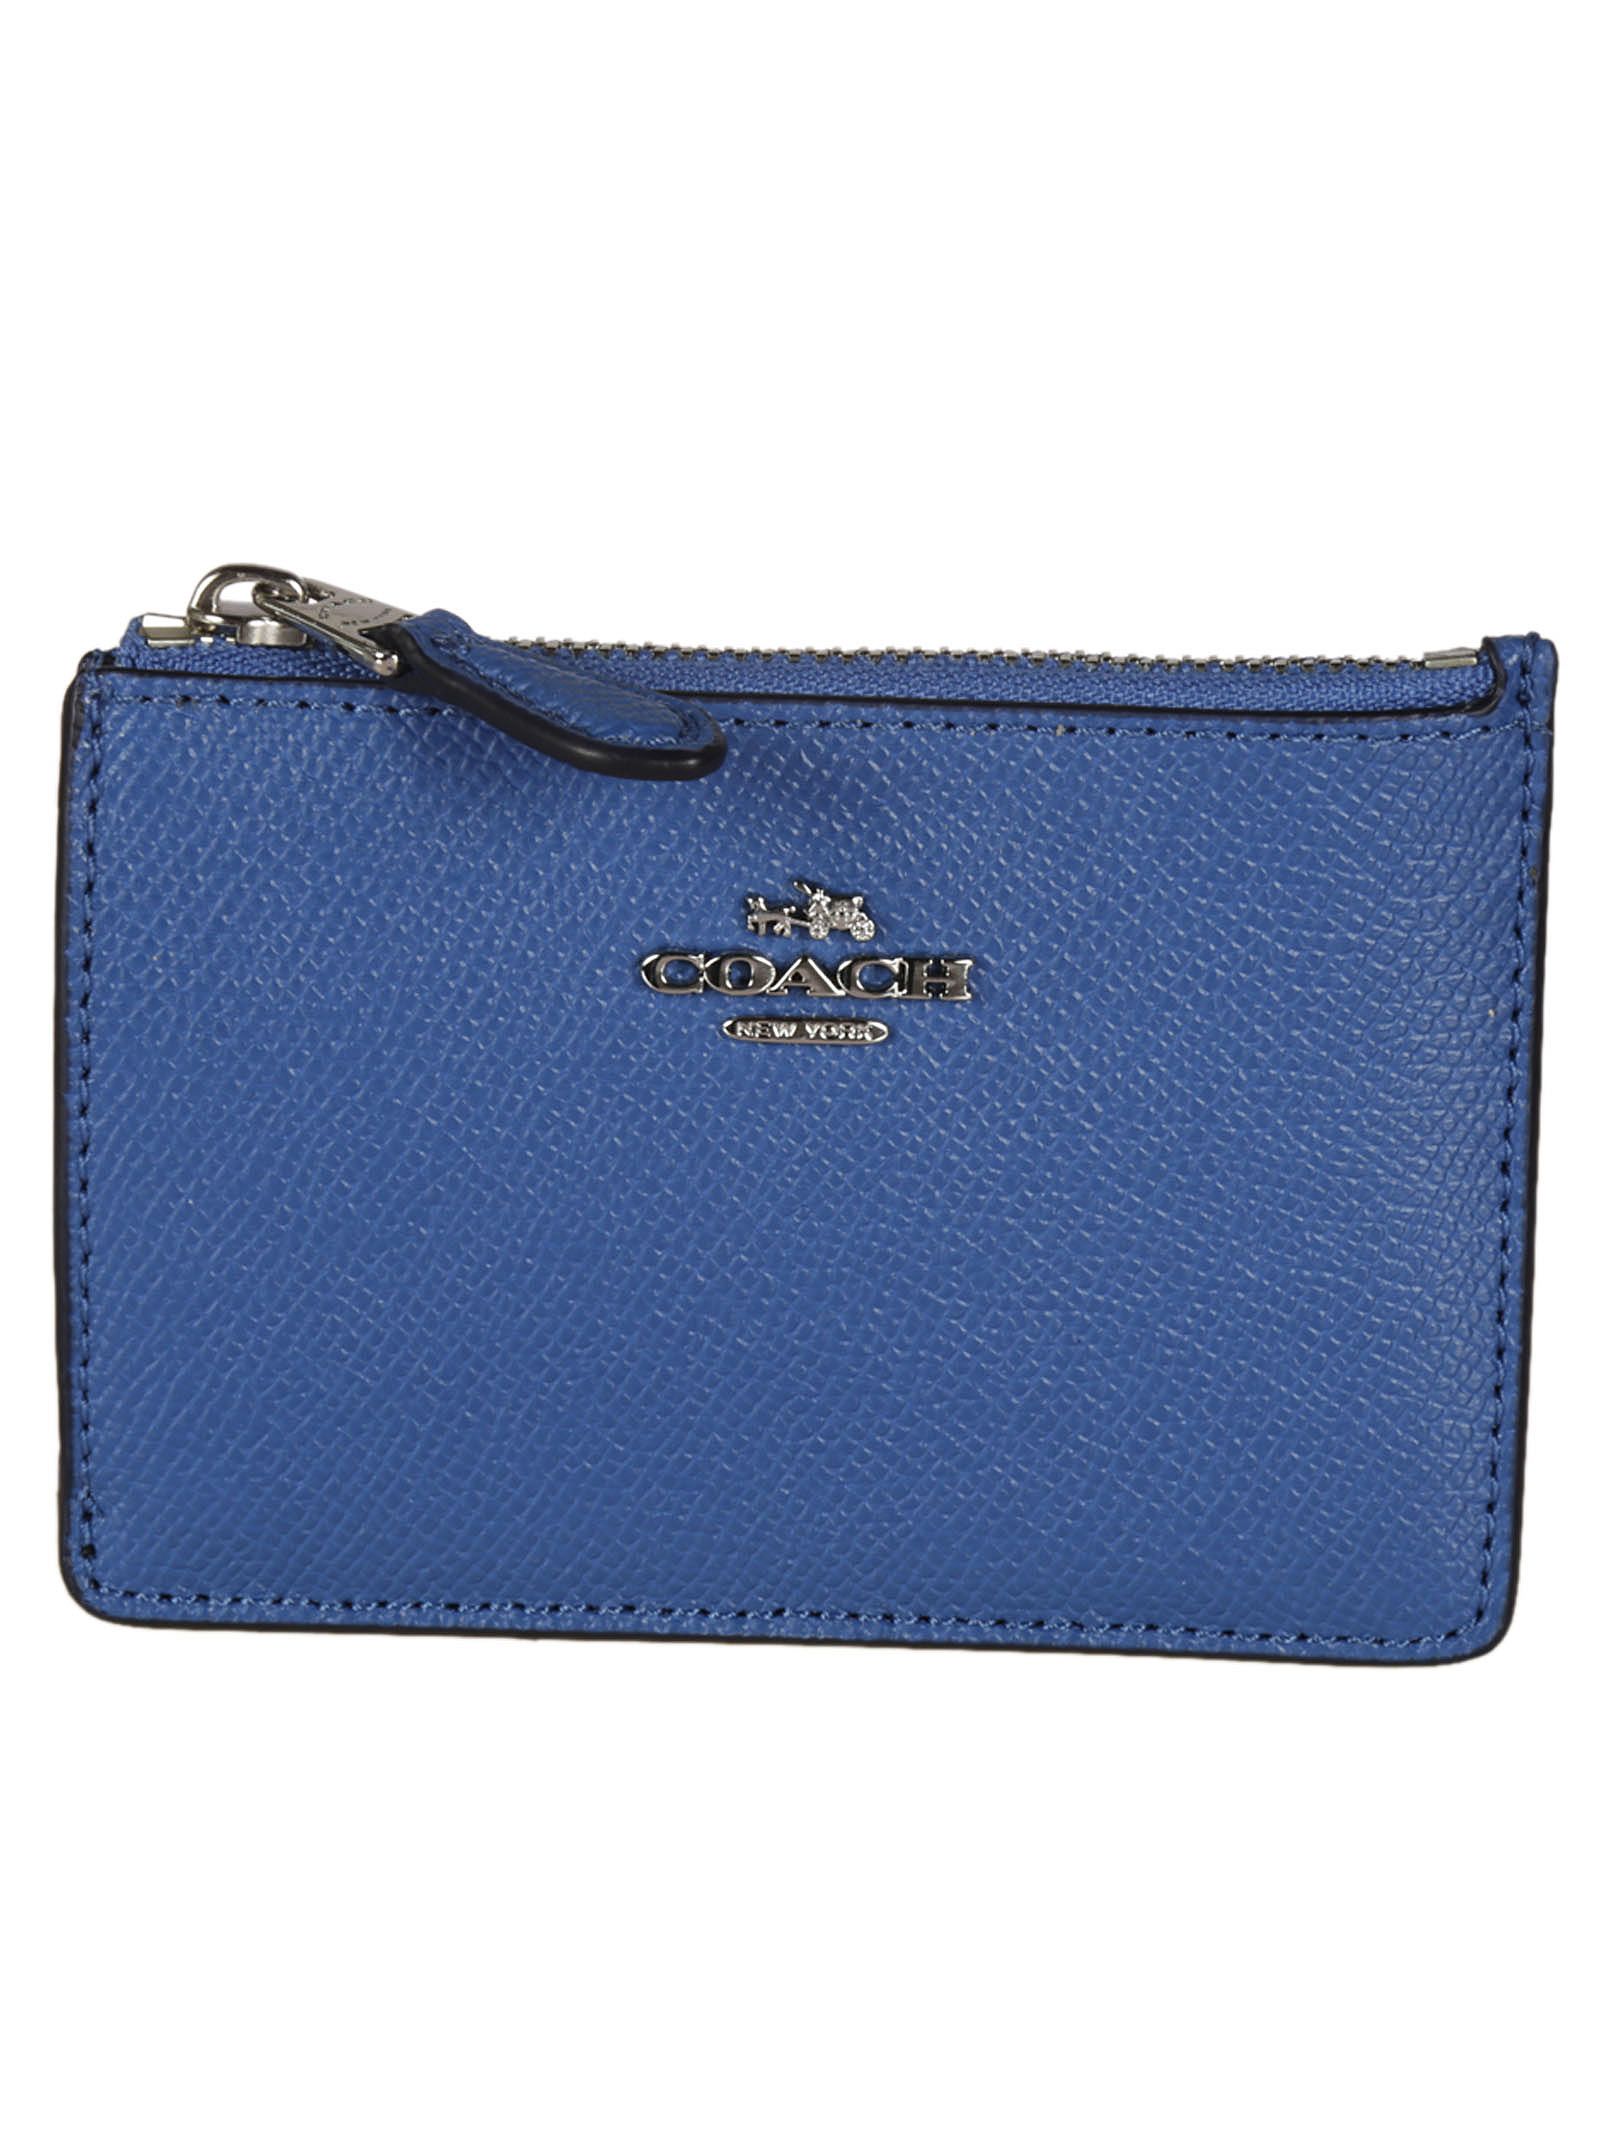 italist | Best price in the market for Coach Coach Mini ID Skinny Card ...